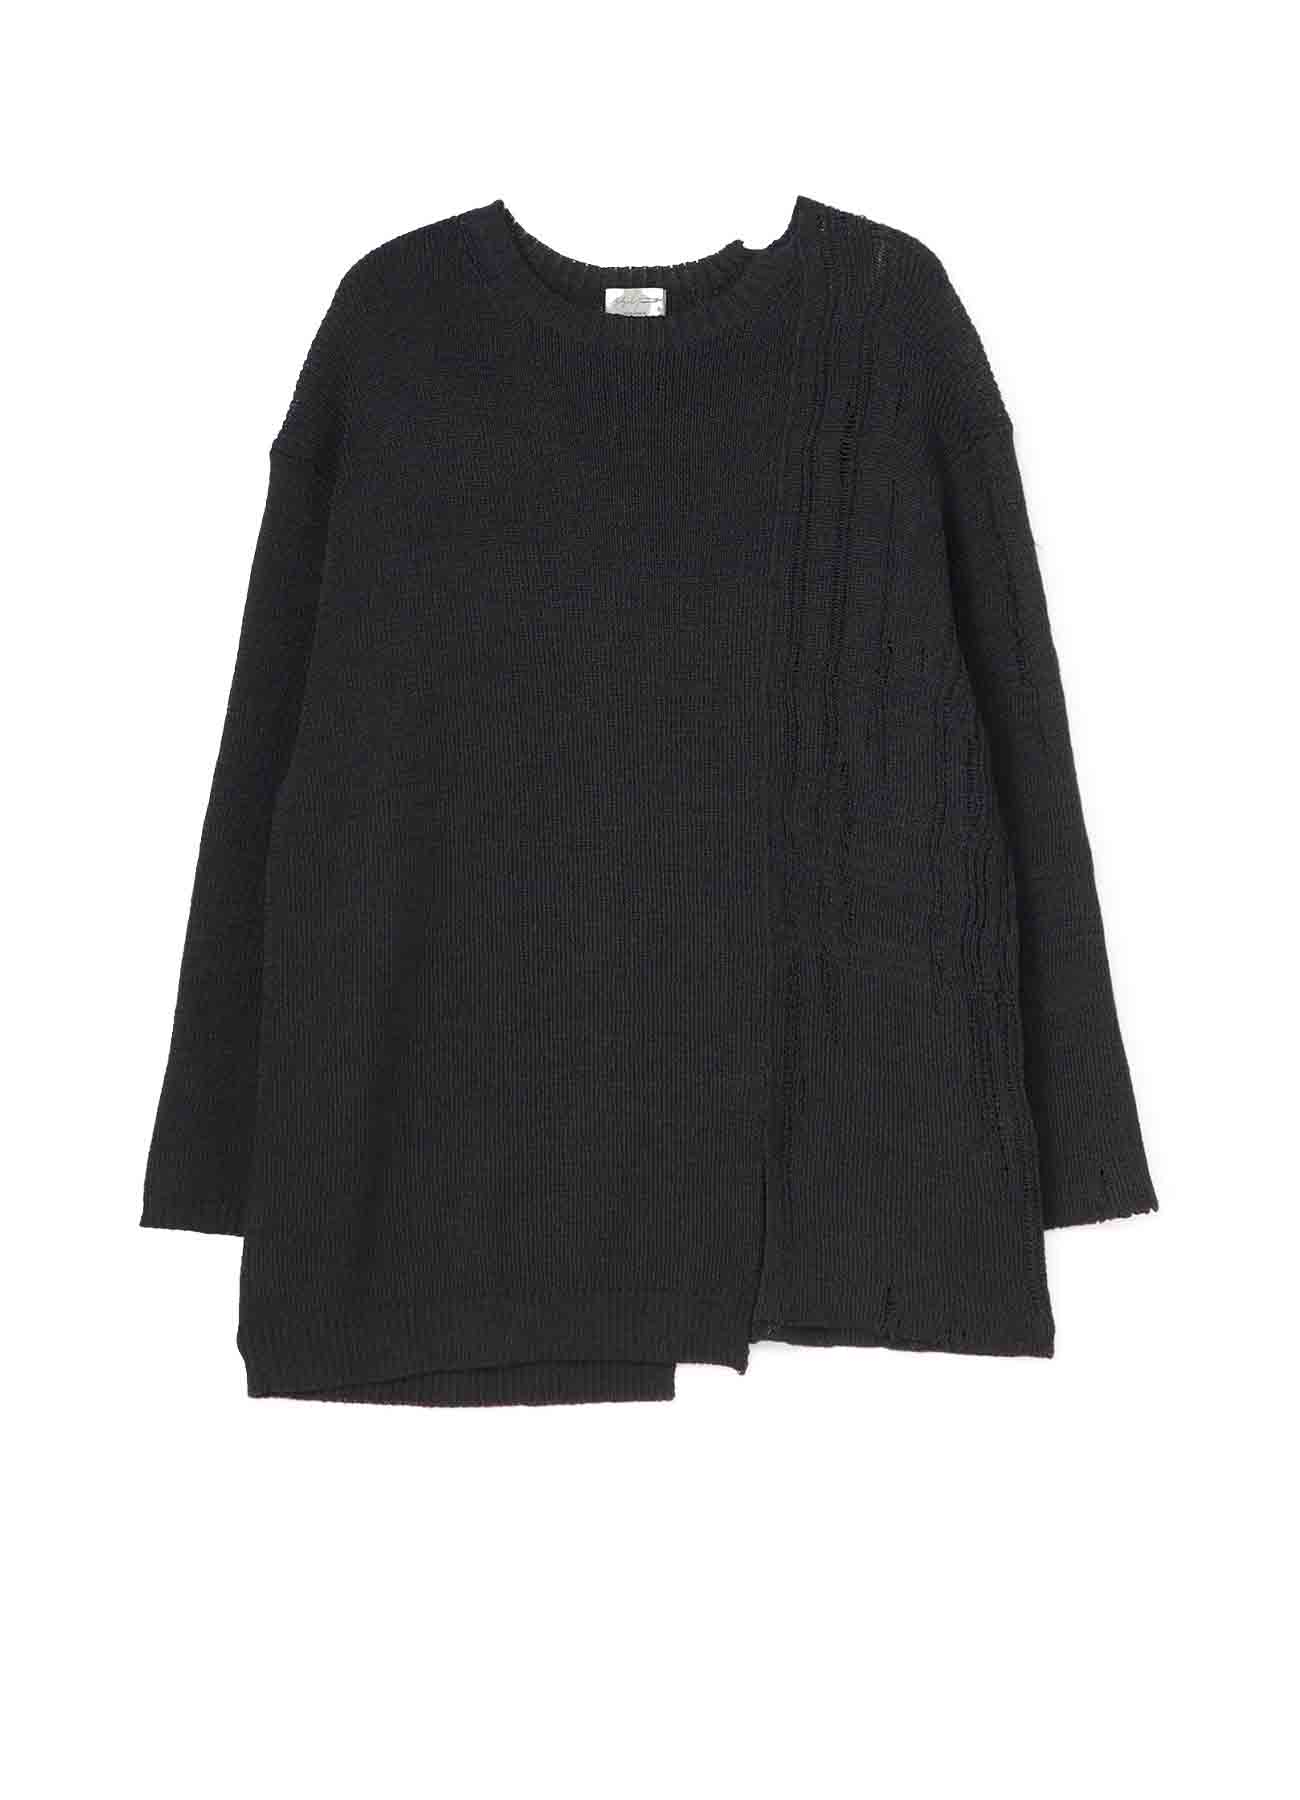 7G RIB + PRINT PATCHED ROUND NECK LONG SLEEVES